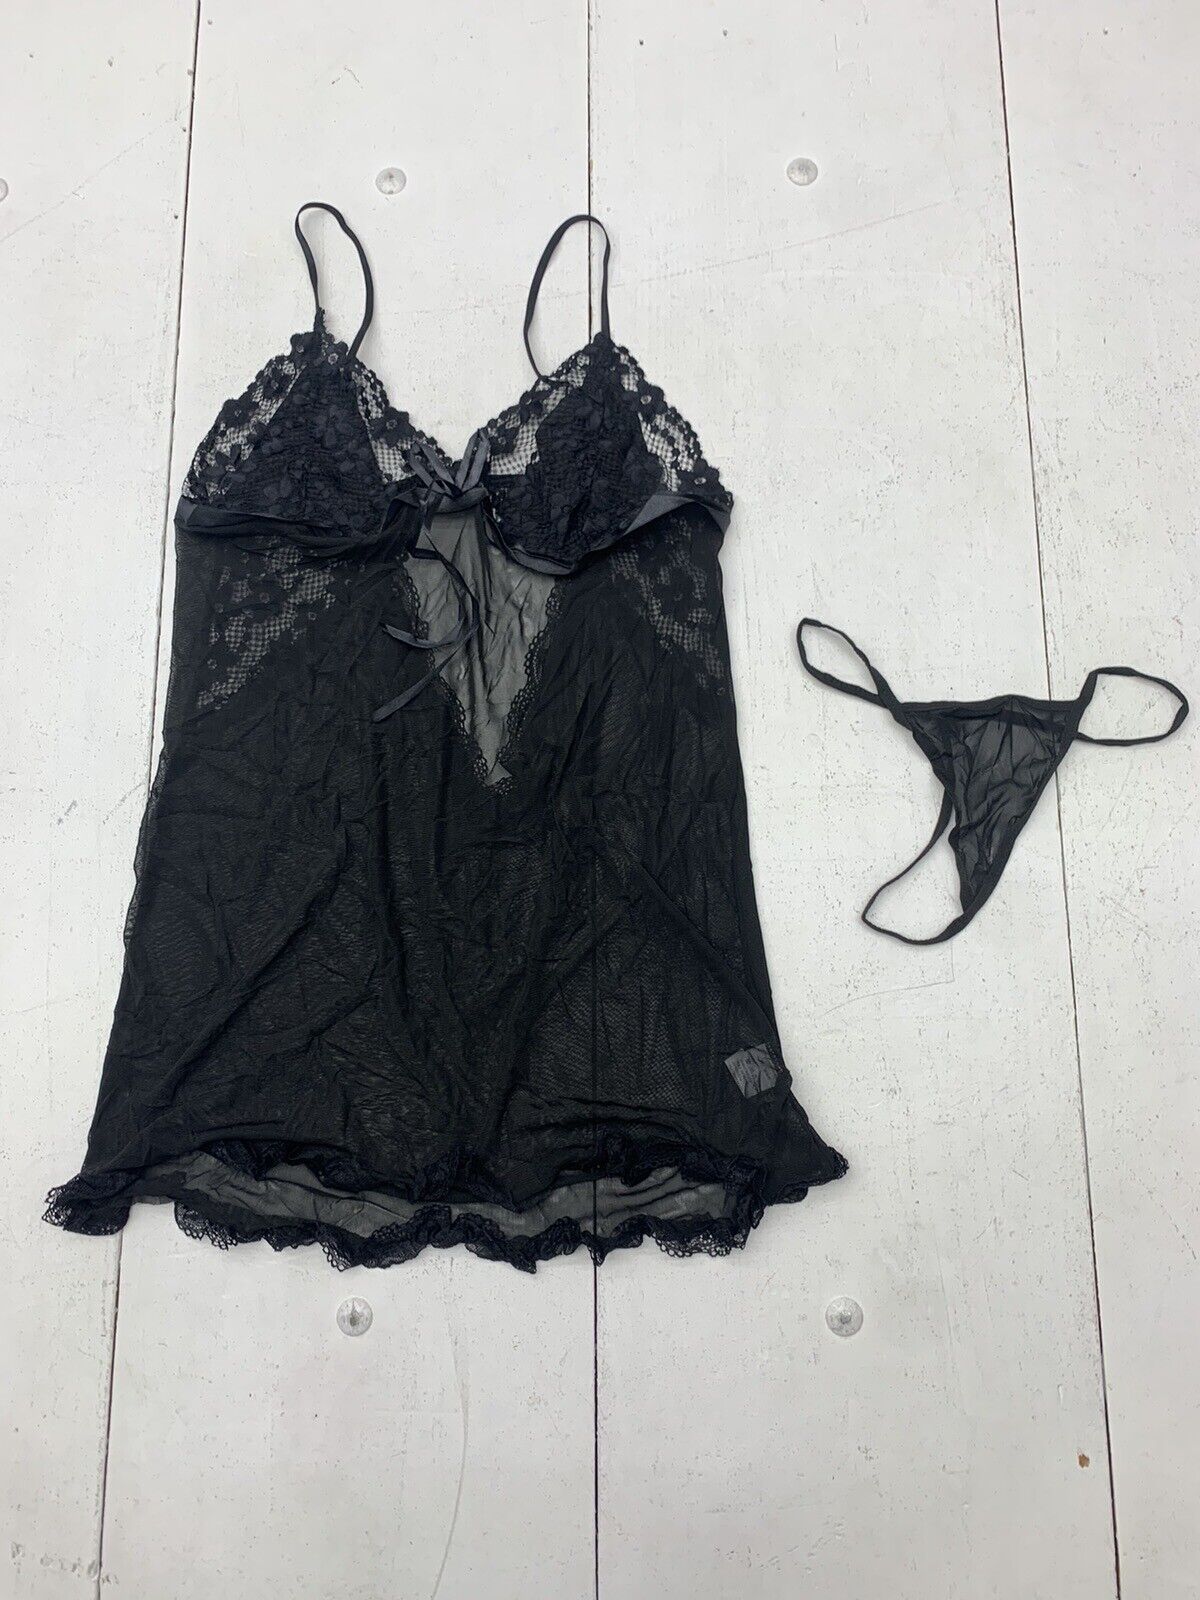 Womens Sheer Black Lace Lingerie Size Small - beyond exchange